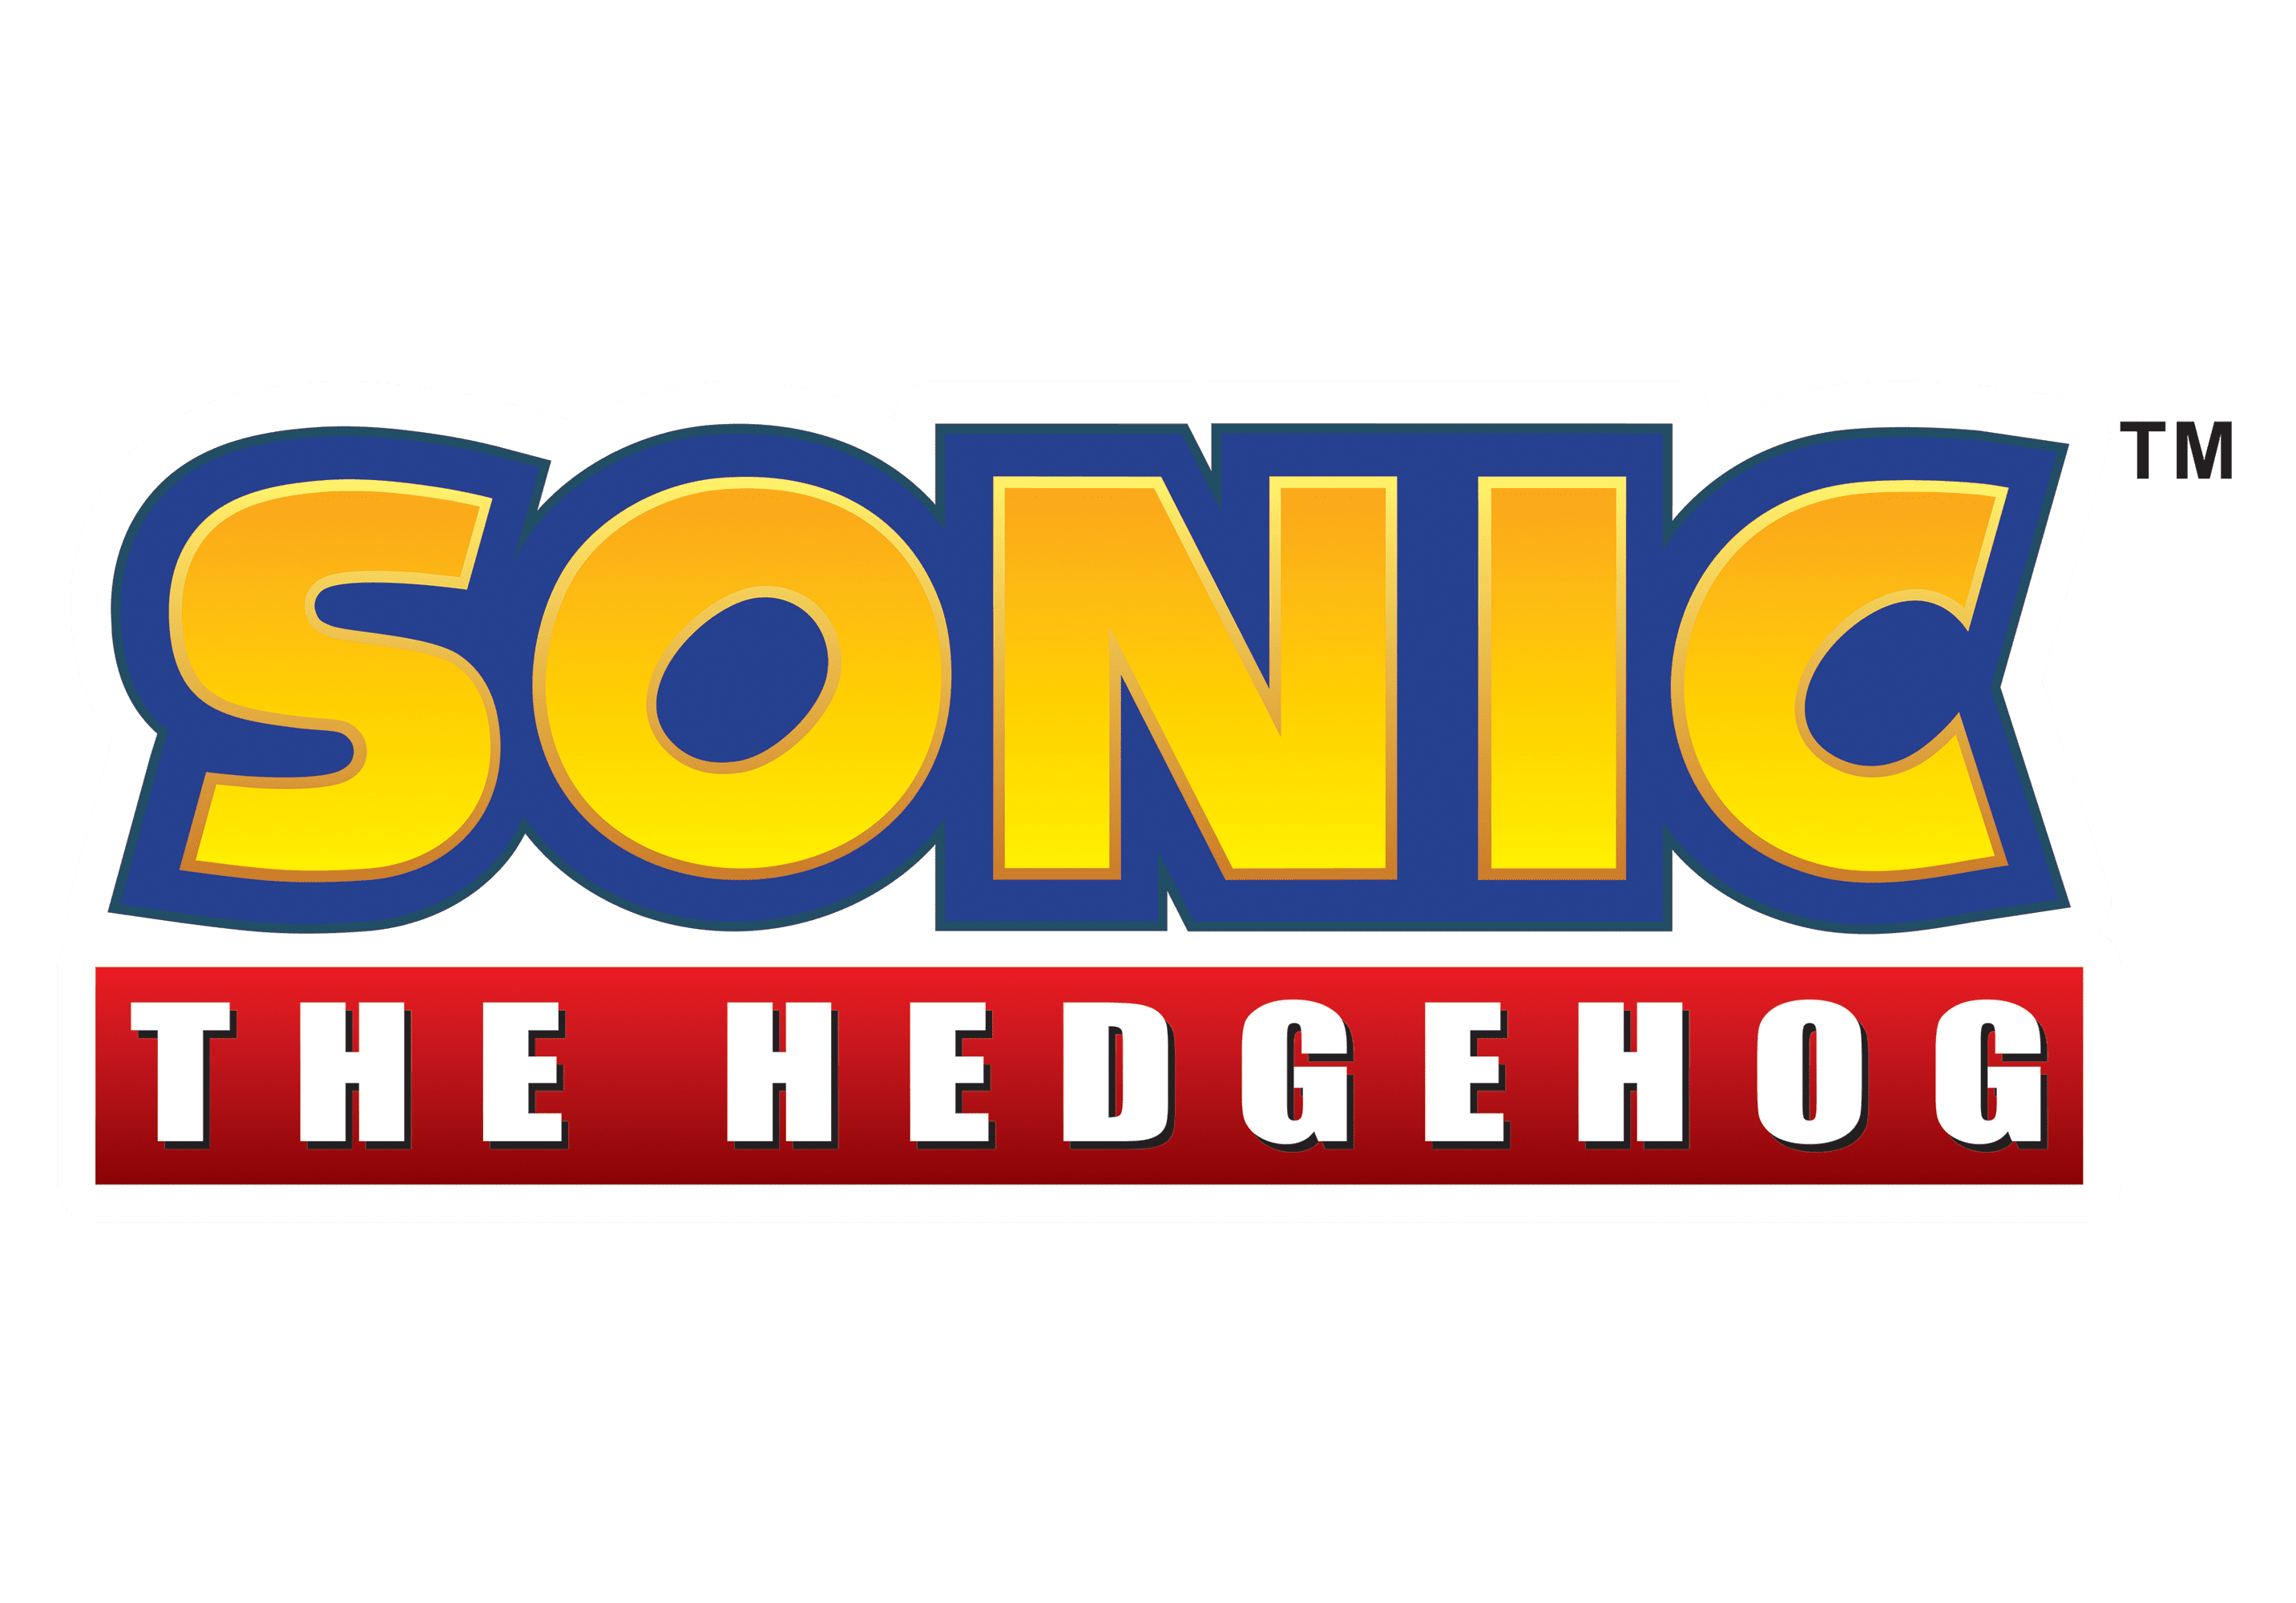 Hedgehogs Can't Swim: Knuckles' Chaotix